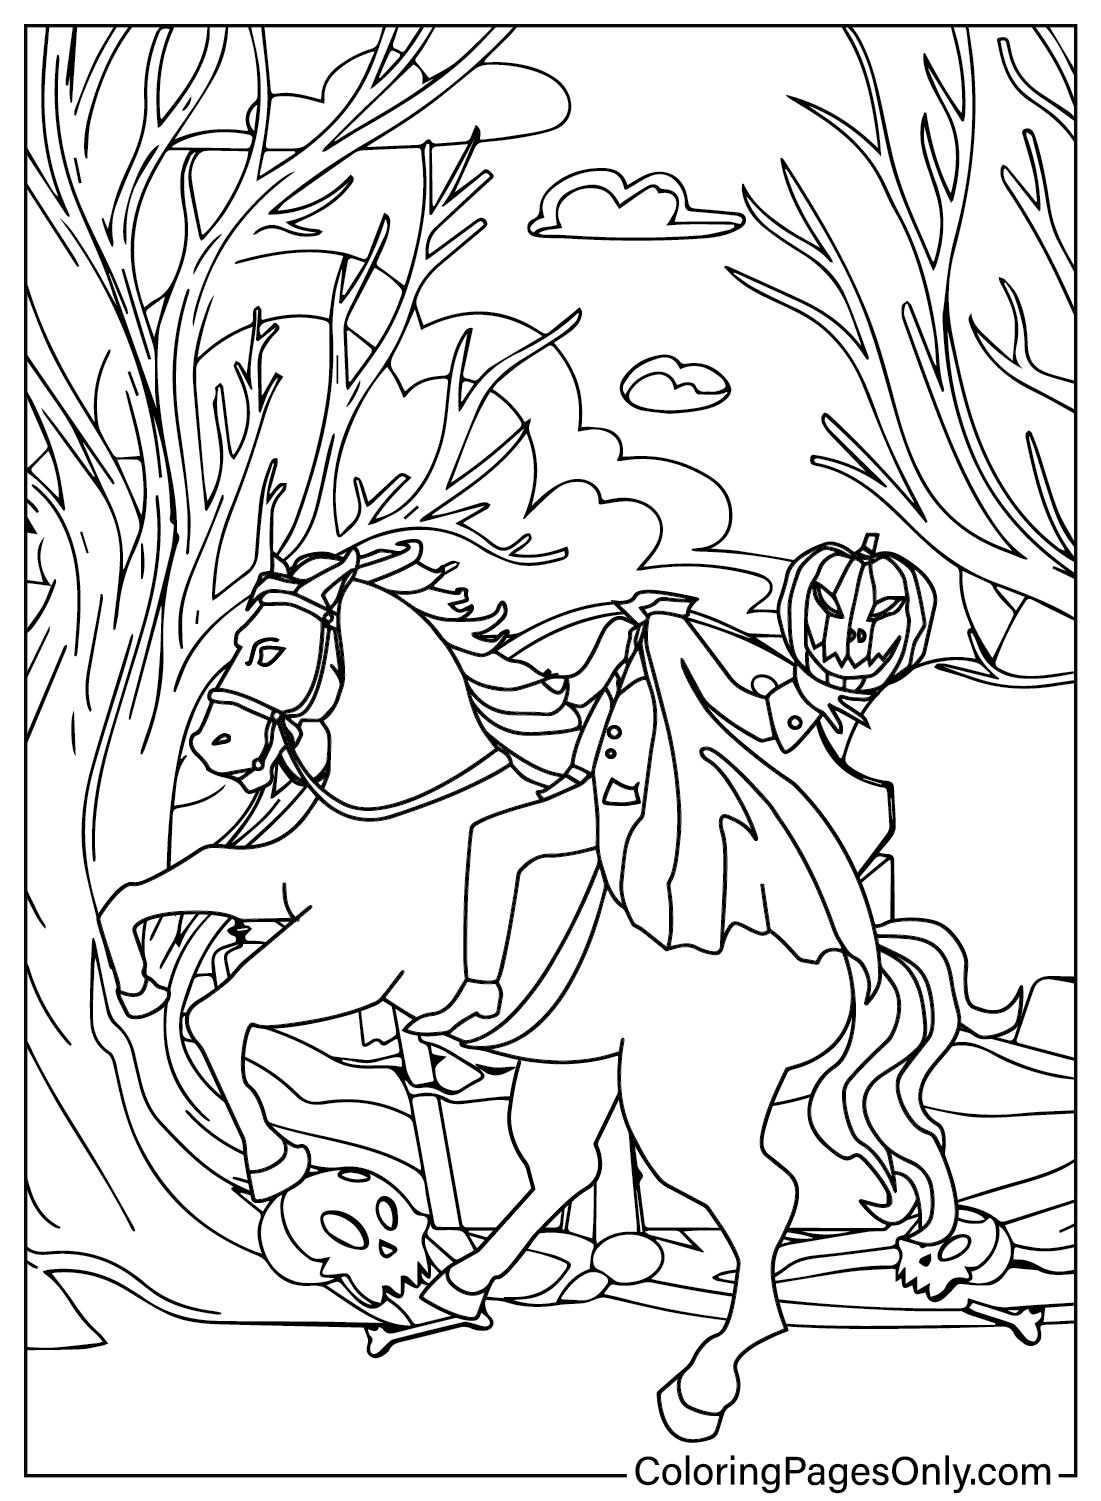 Headless Horseman Coloring Pages to Download from Headless Horseman